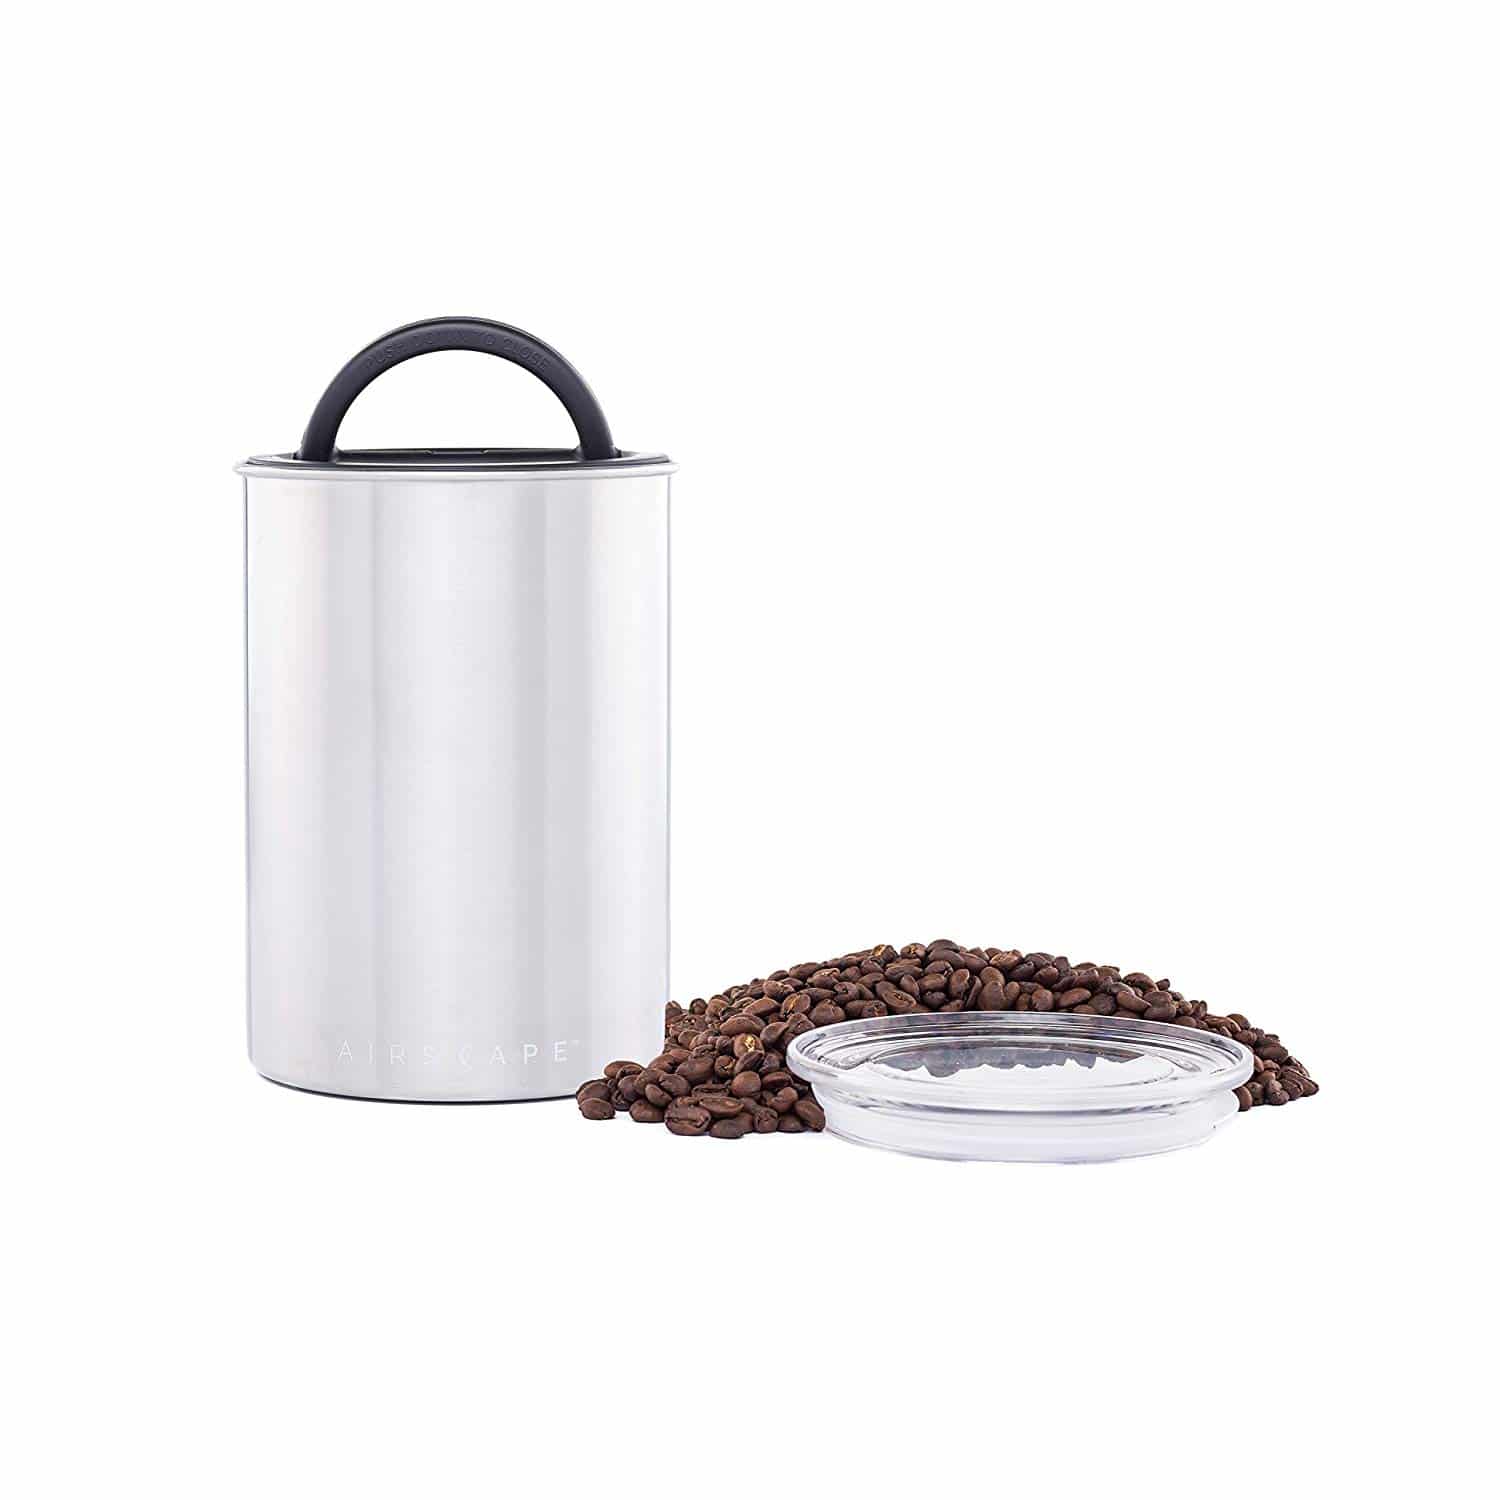 Planetary Design Airscape Coffee and Food Storage Canister